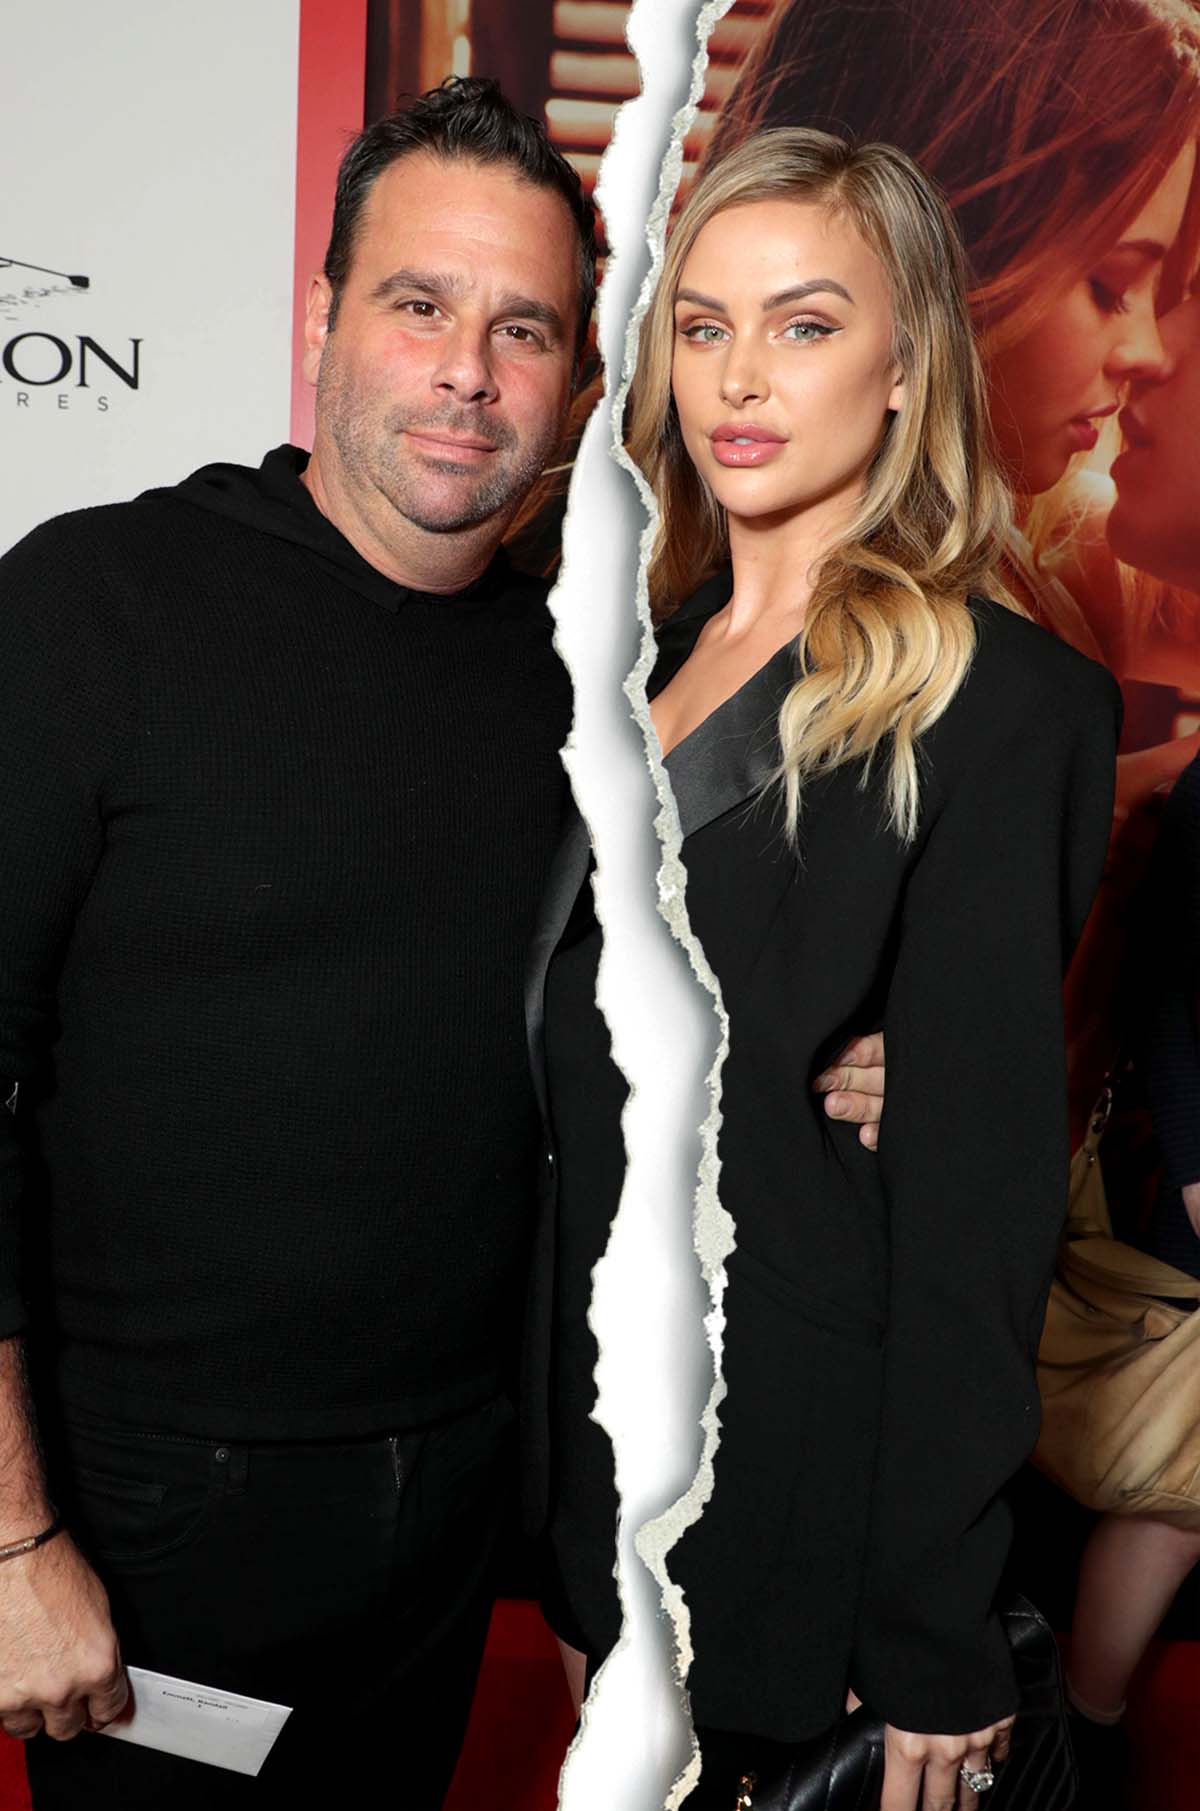 Lala Kent and Randall Emmett Split: Everything We Know